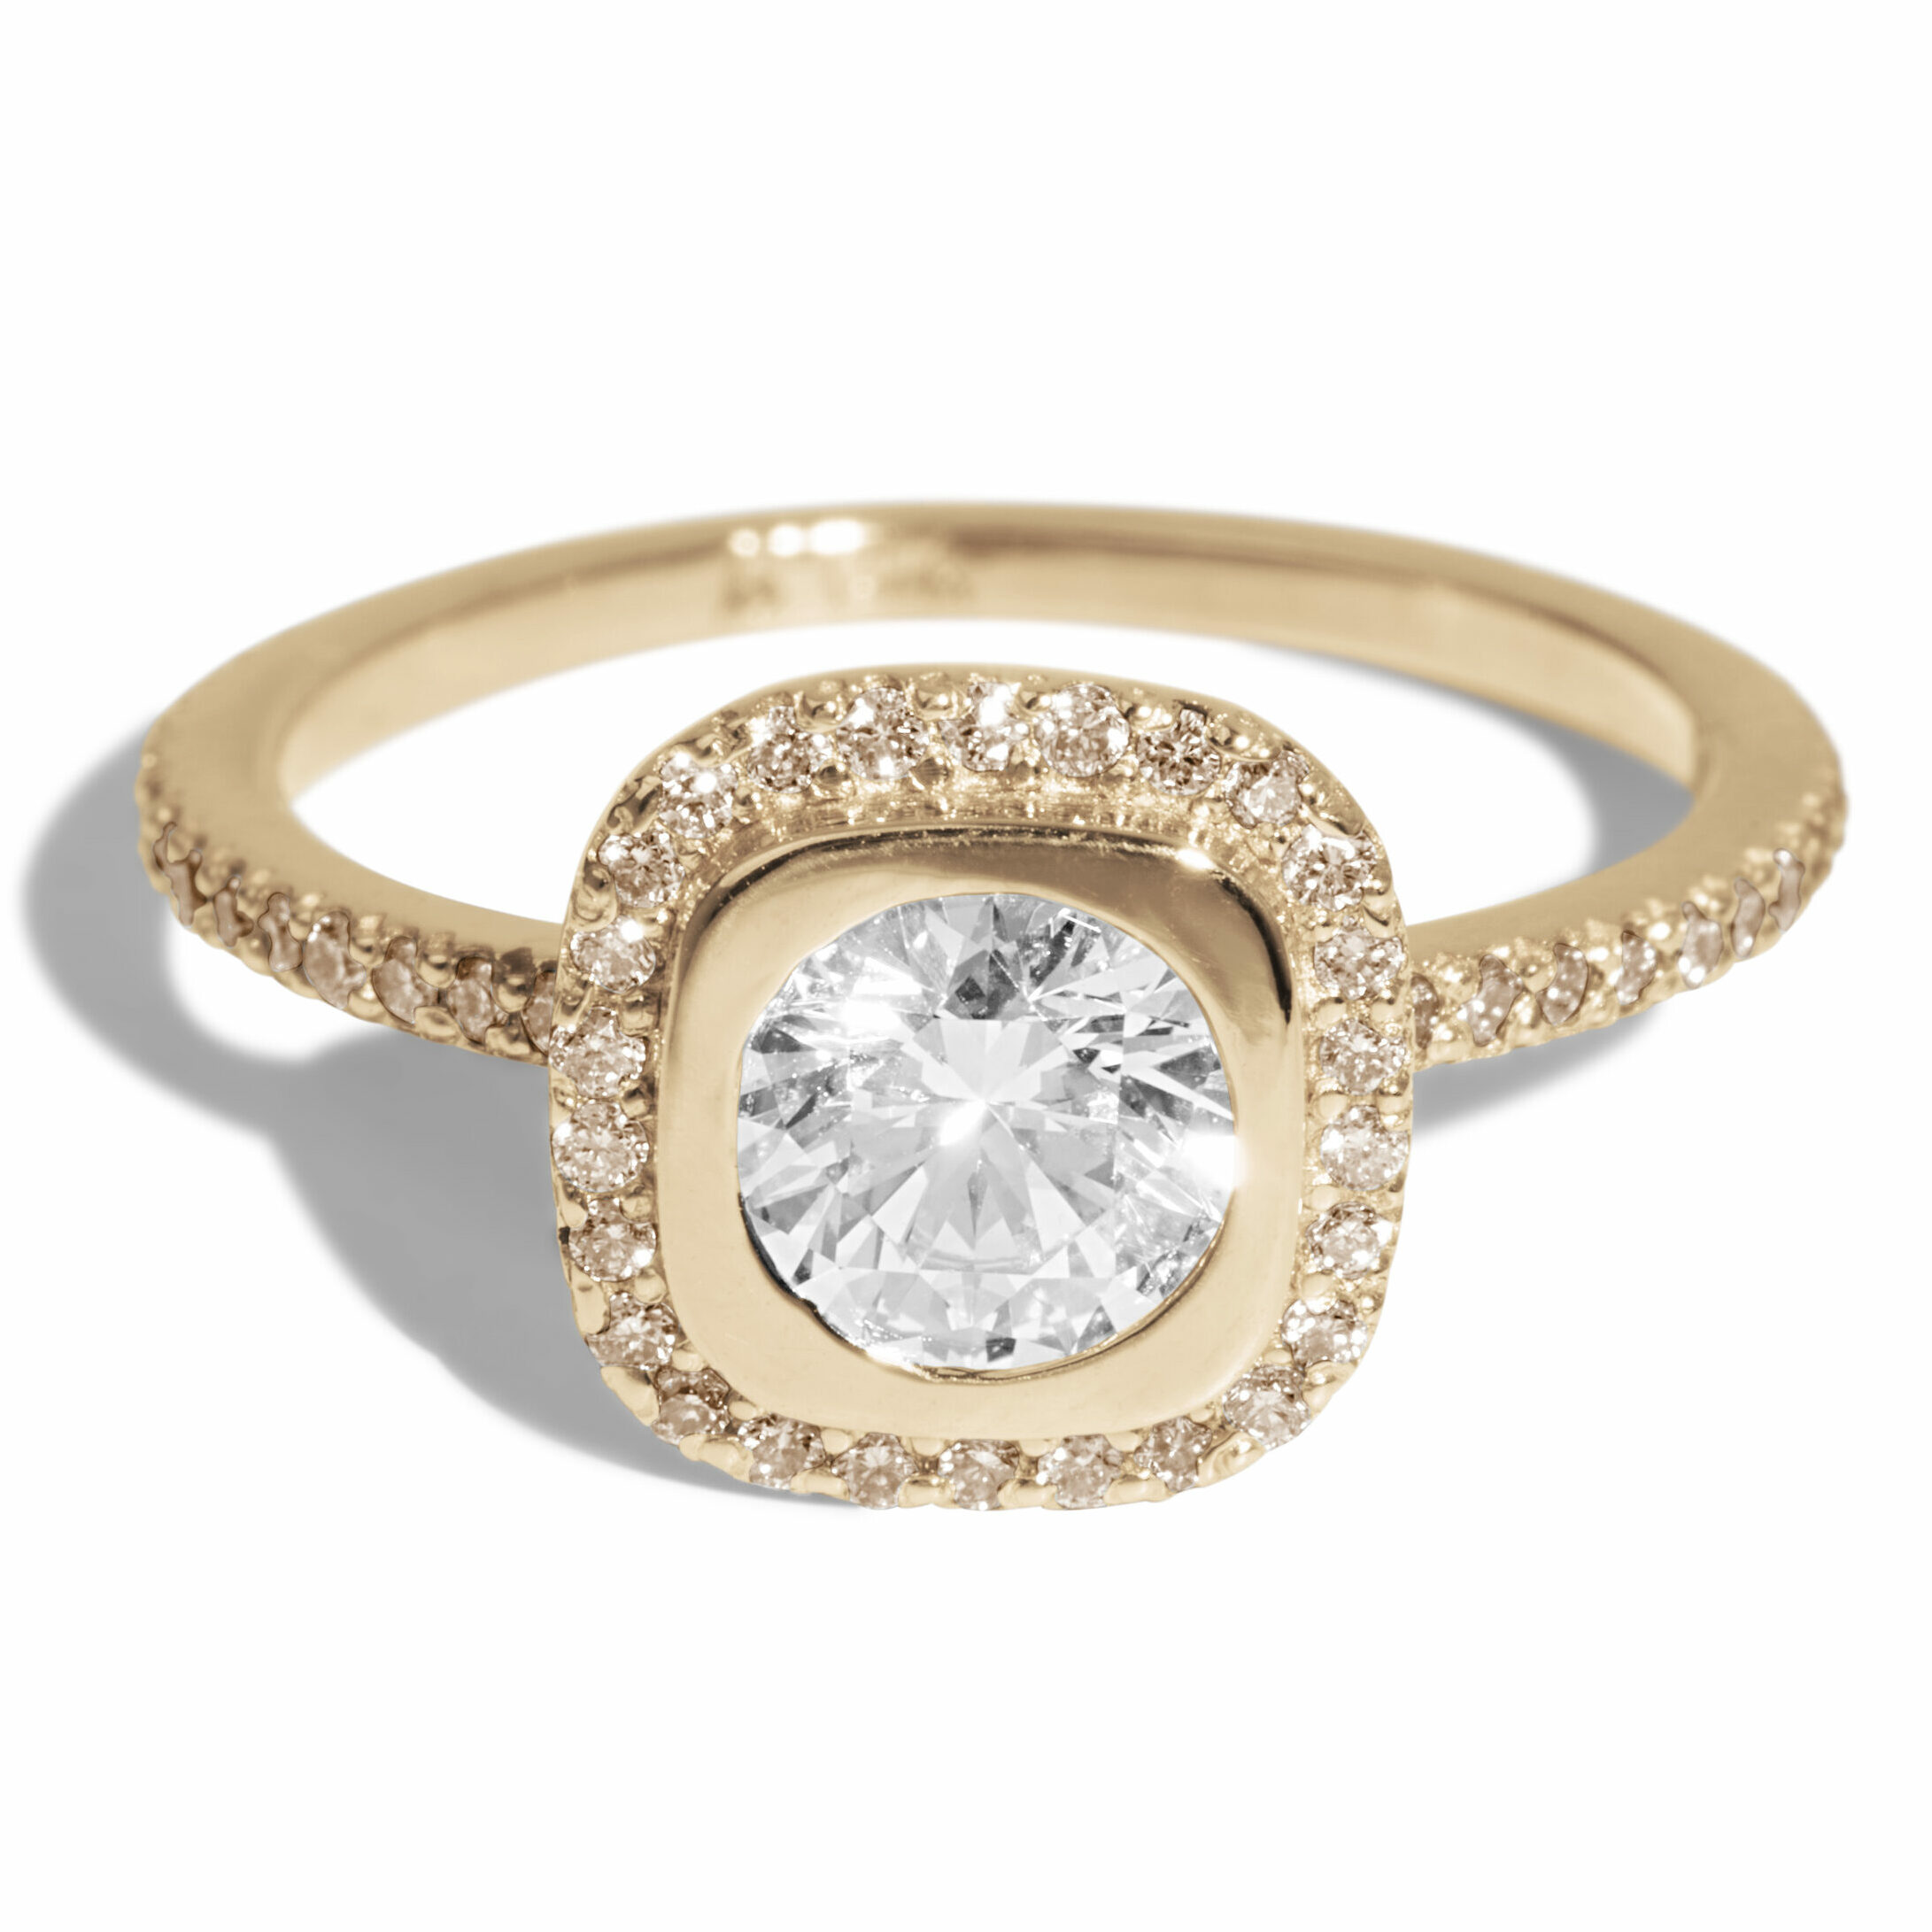 This contemporary take on a halo ring features a diamond center stone with a champagne diamond halo.